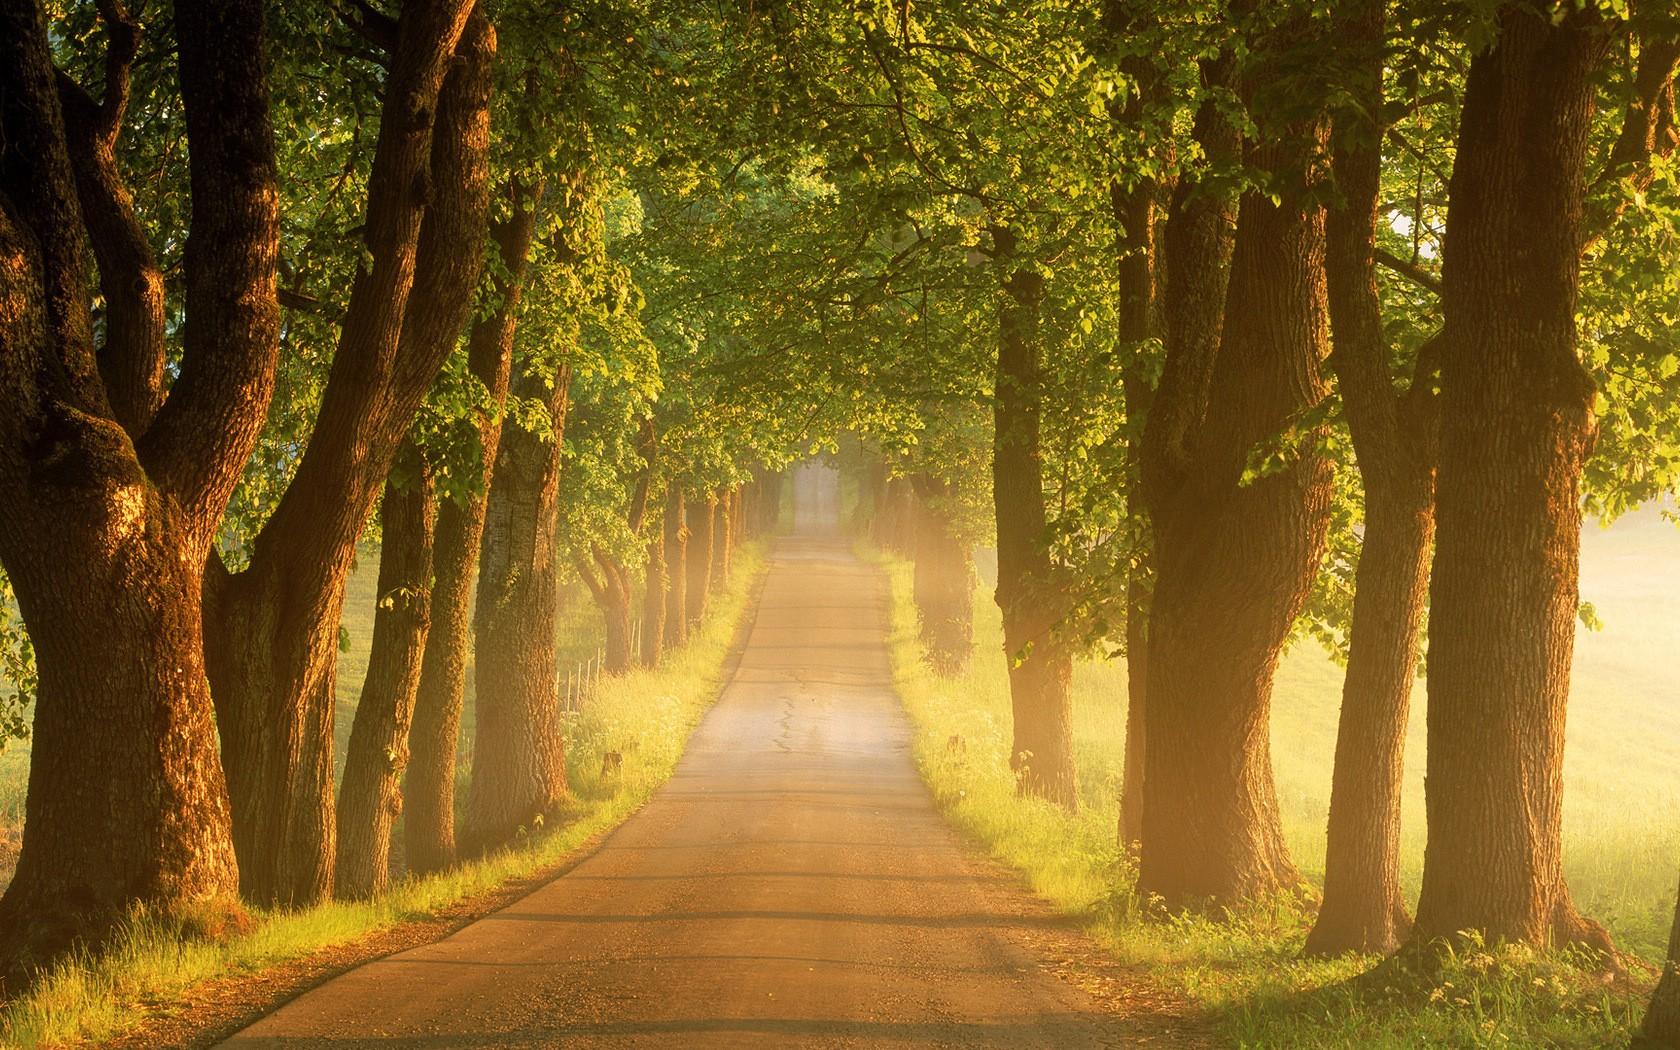 Free Images : landscape, tree, nature, forest, grass, road, trail, countryside, leaf, fall ...